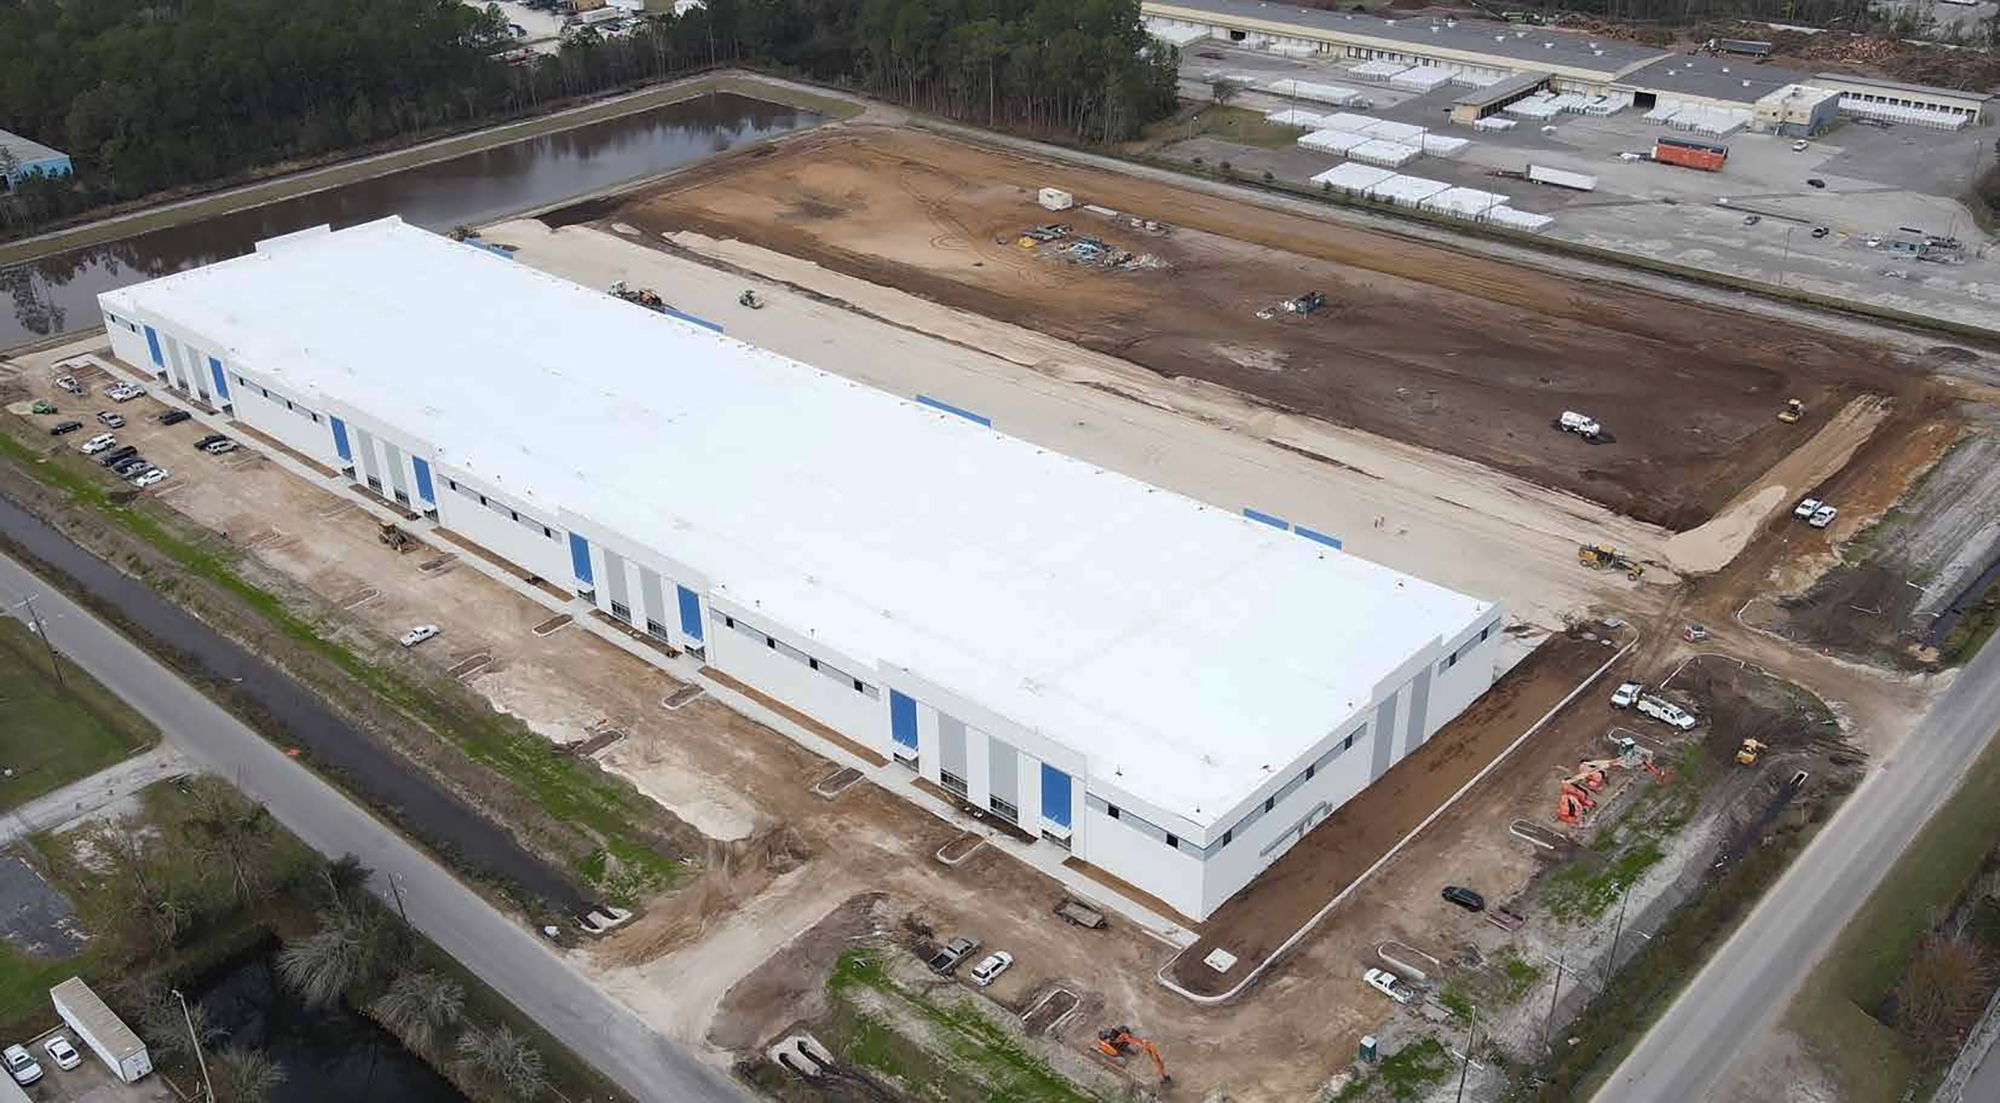 Cenntro plans to begin assembling electric vehicles at its new plant at Lane Industrial Park in West Jacksonville. The facility is projected to produce at least 10,000 vehicles a year.